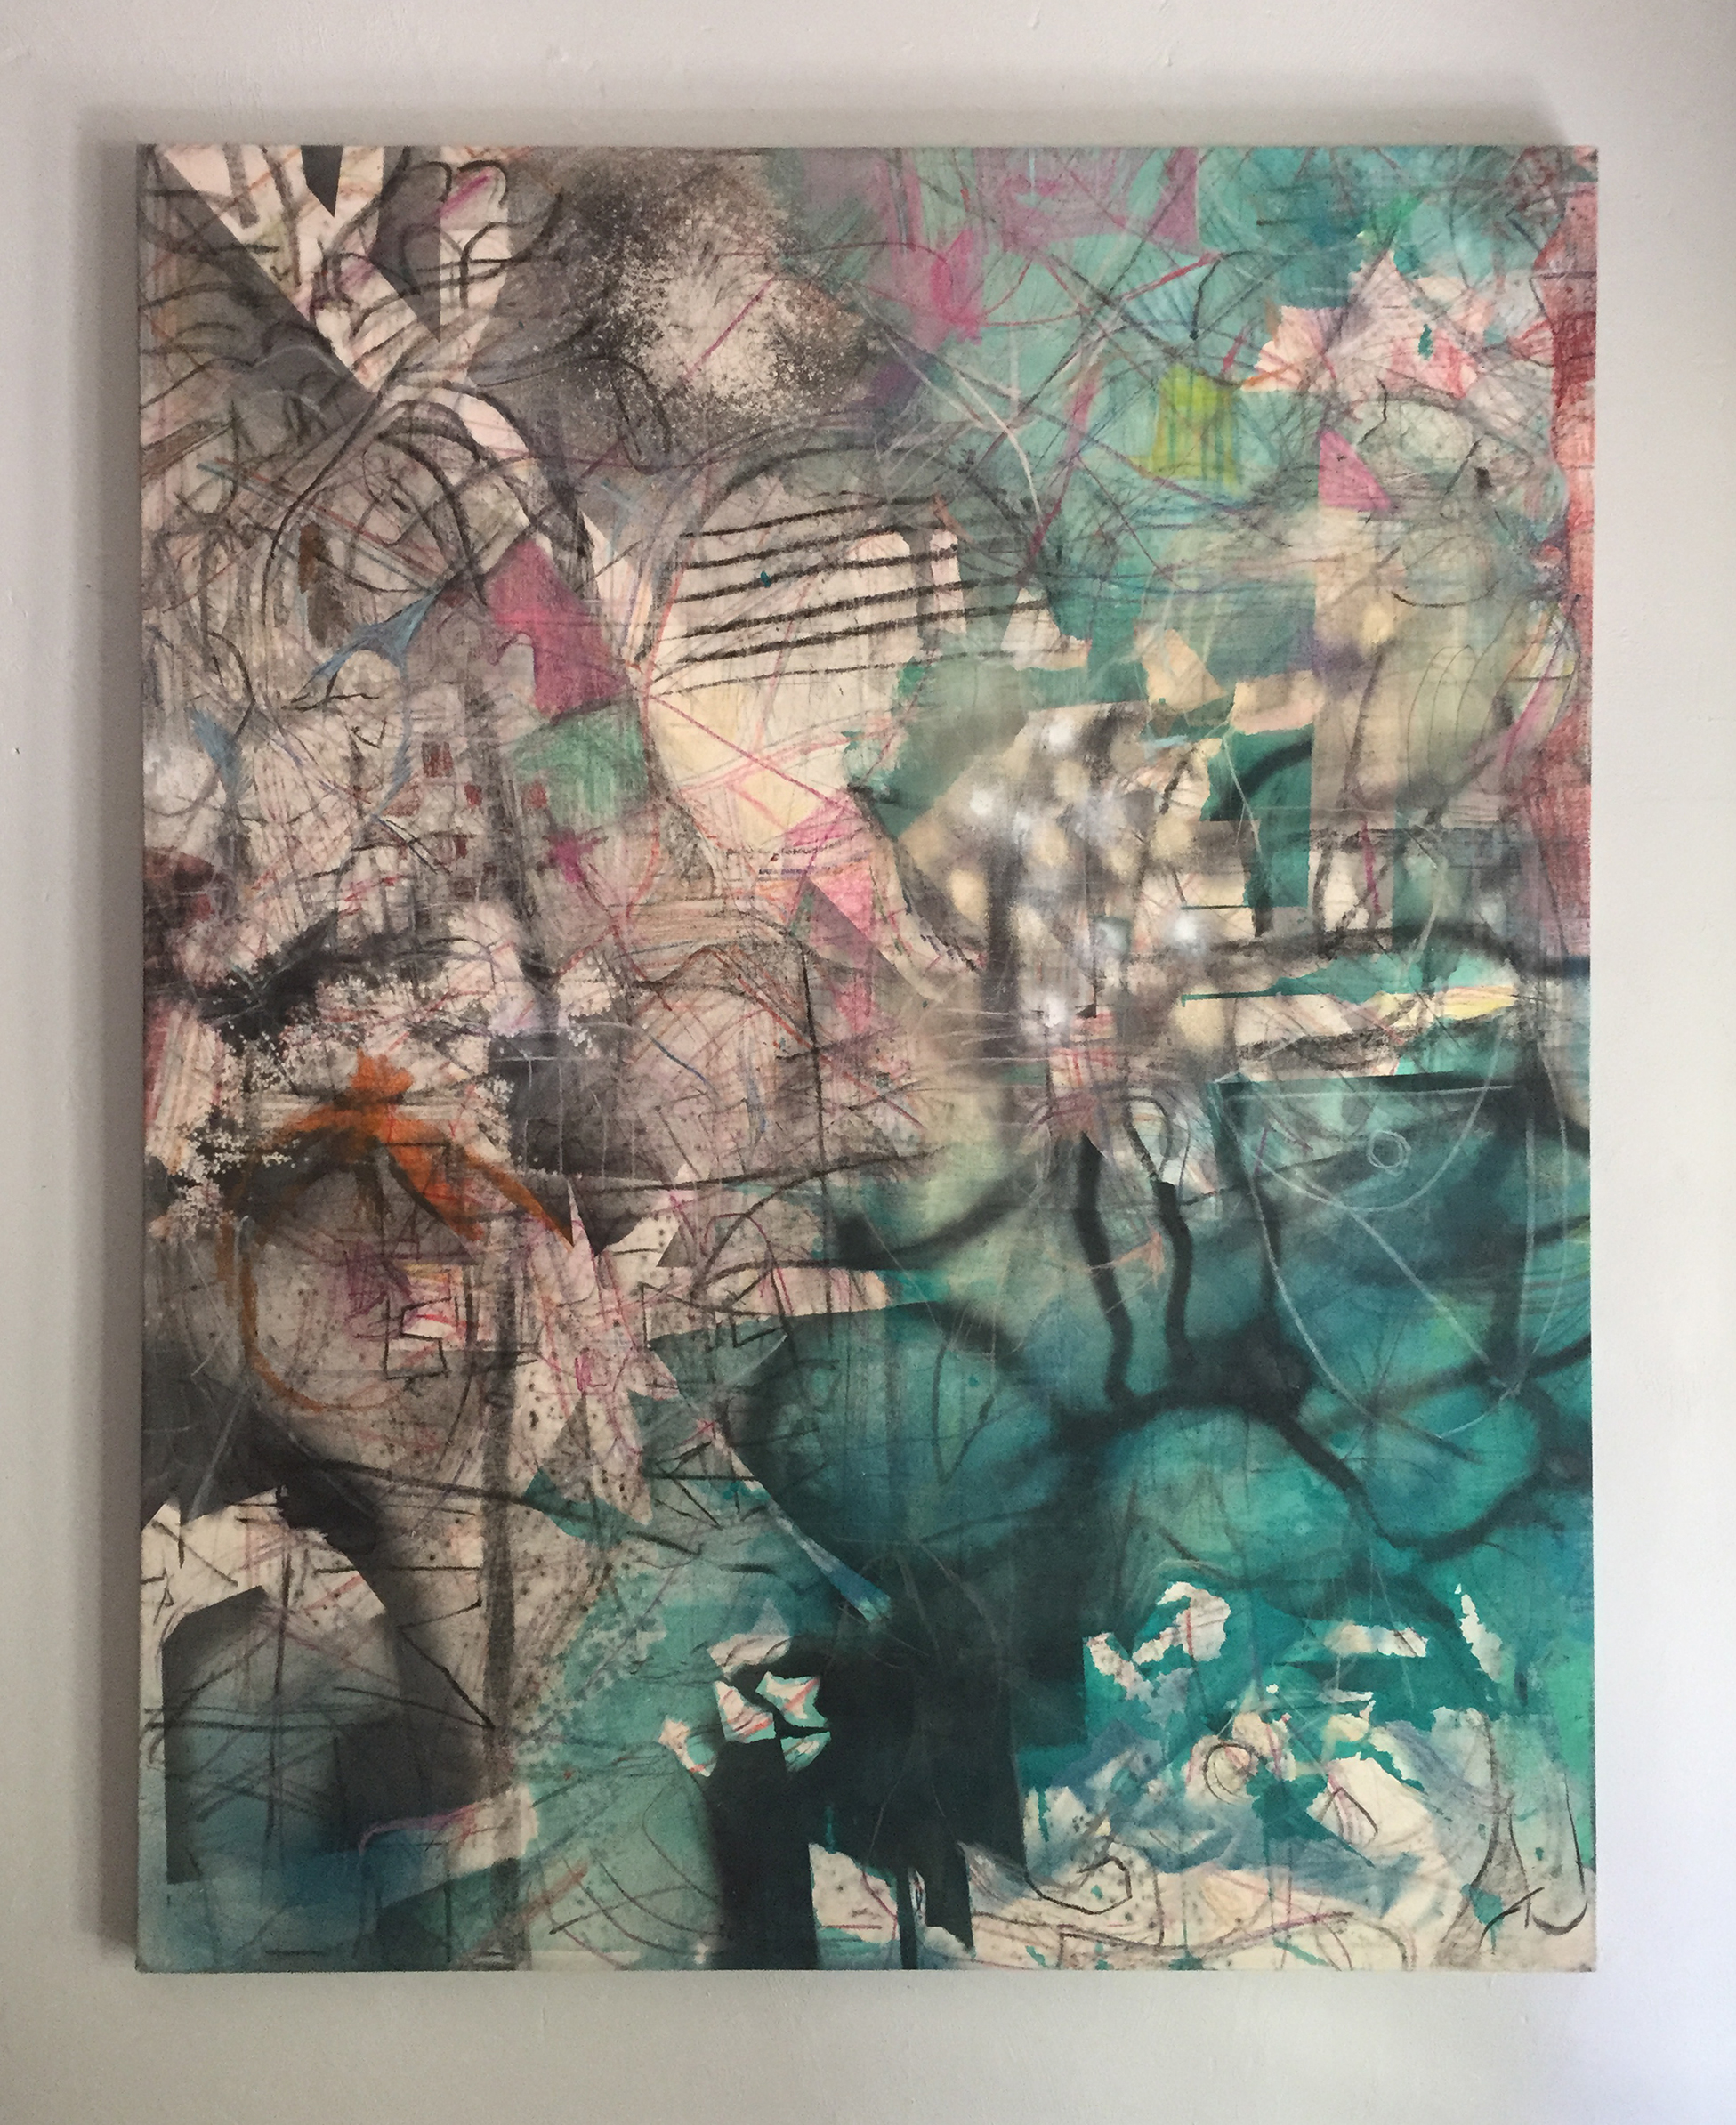   Memorial Drive  2015 Mixed-media on canvas 48 x 60 in. 